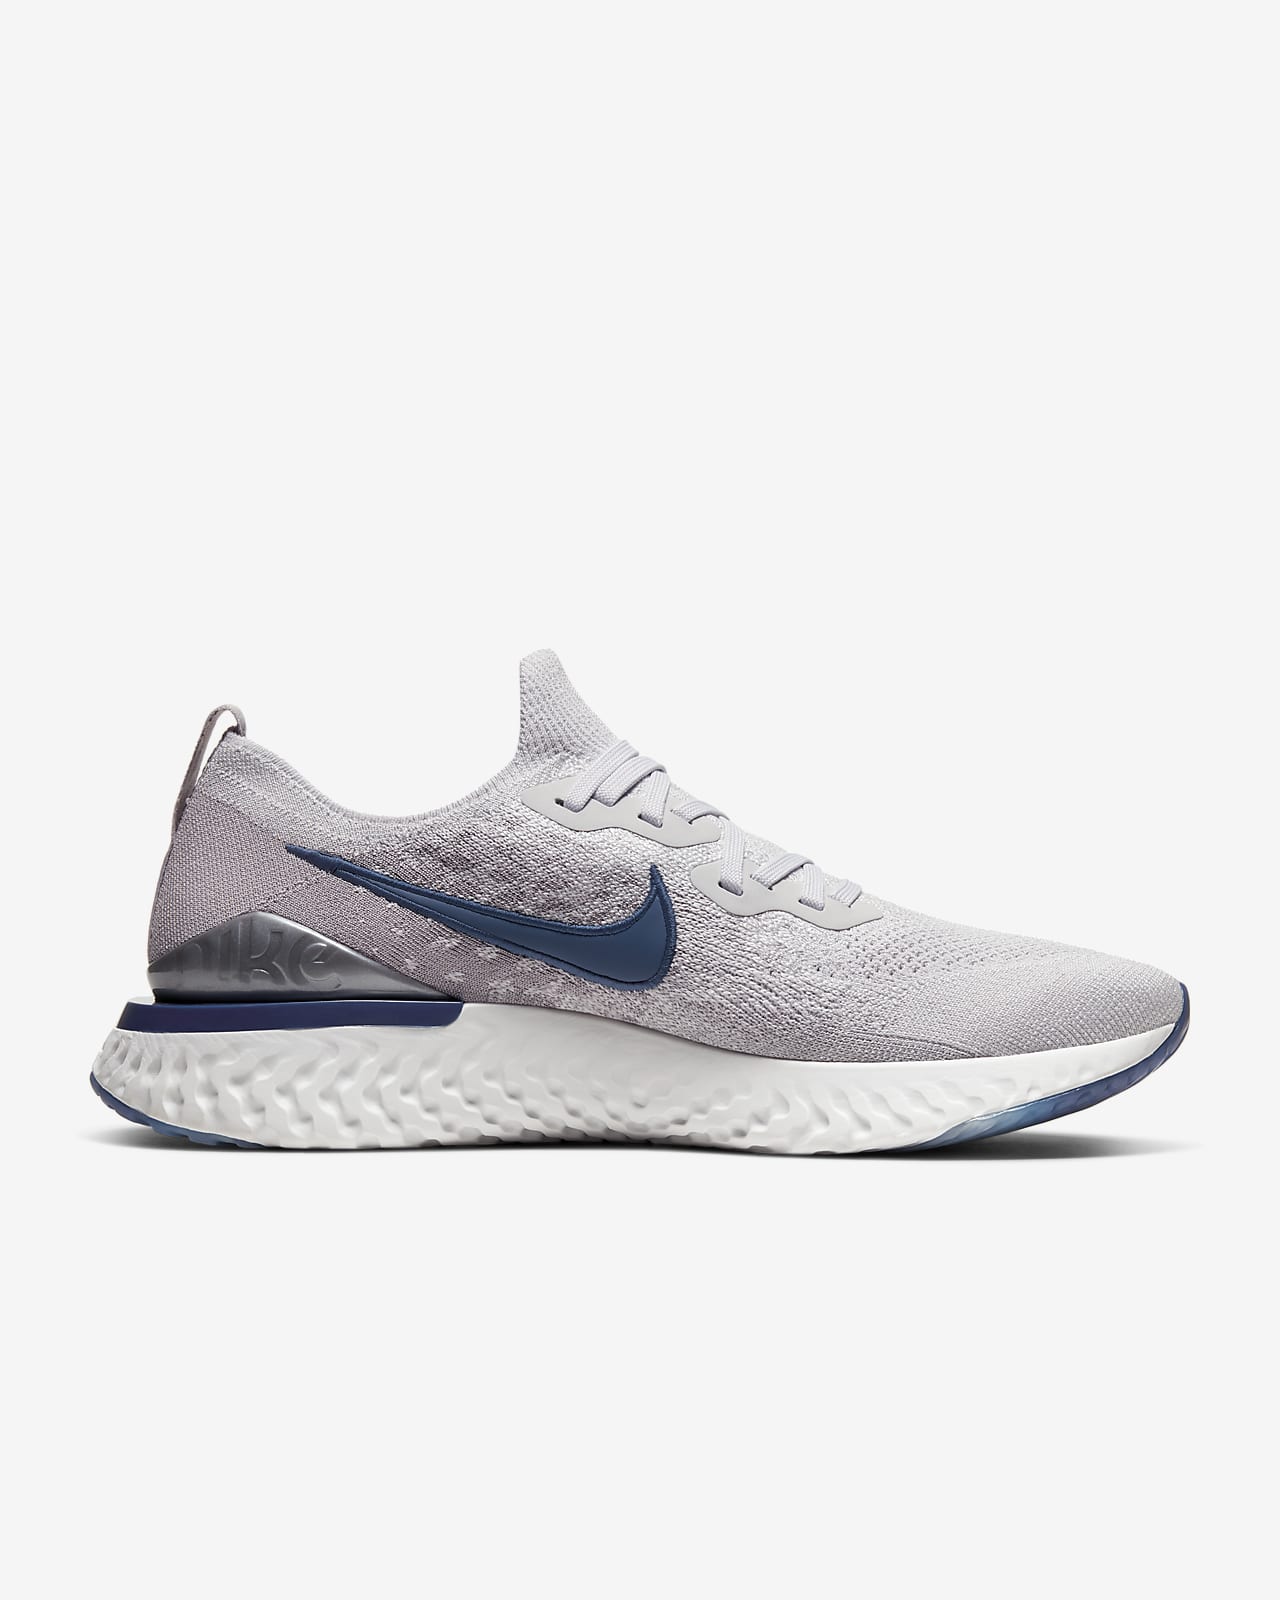 nike epic react flyknit 2 blue void teal tint